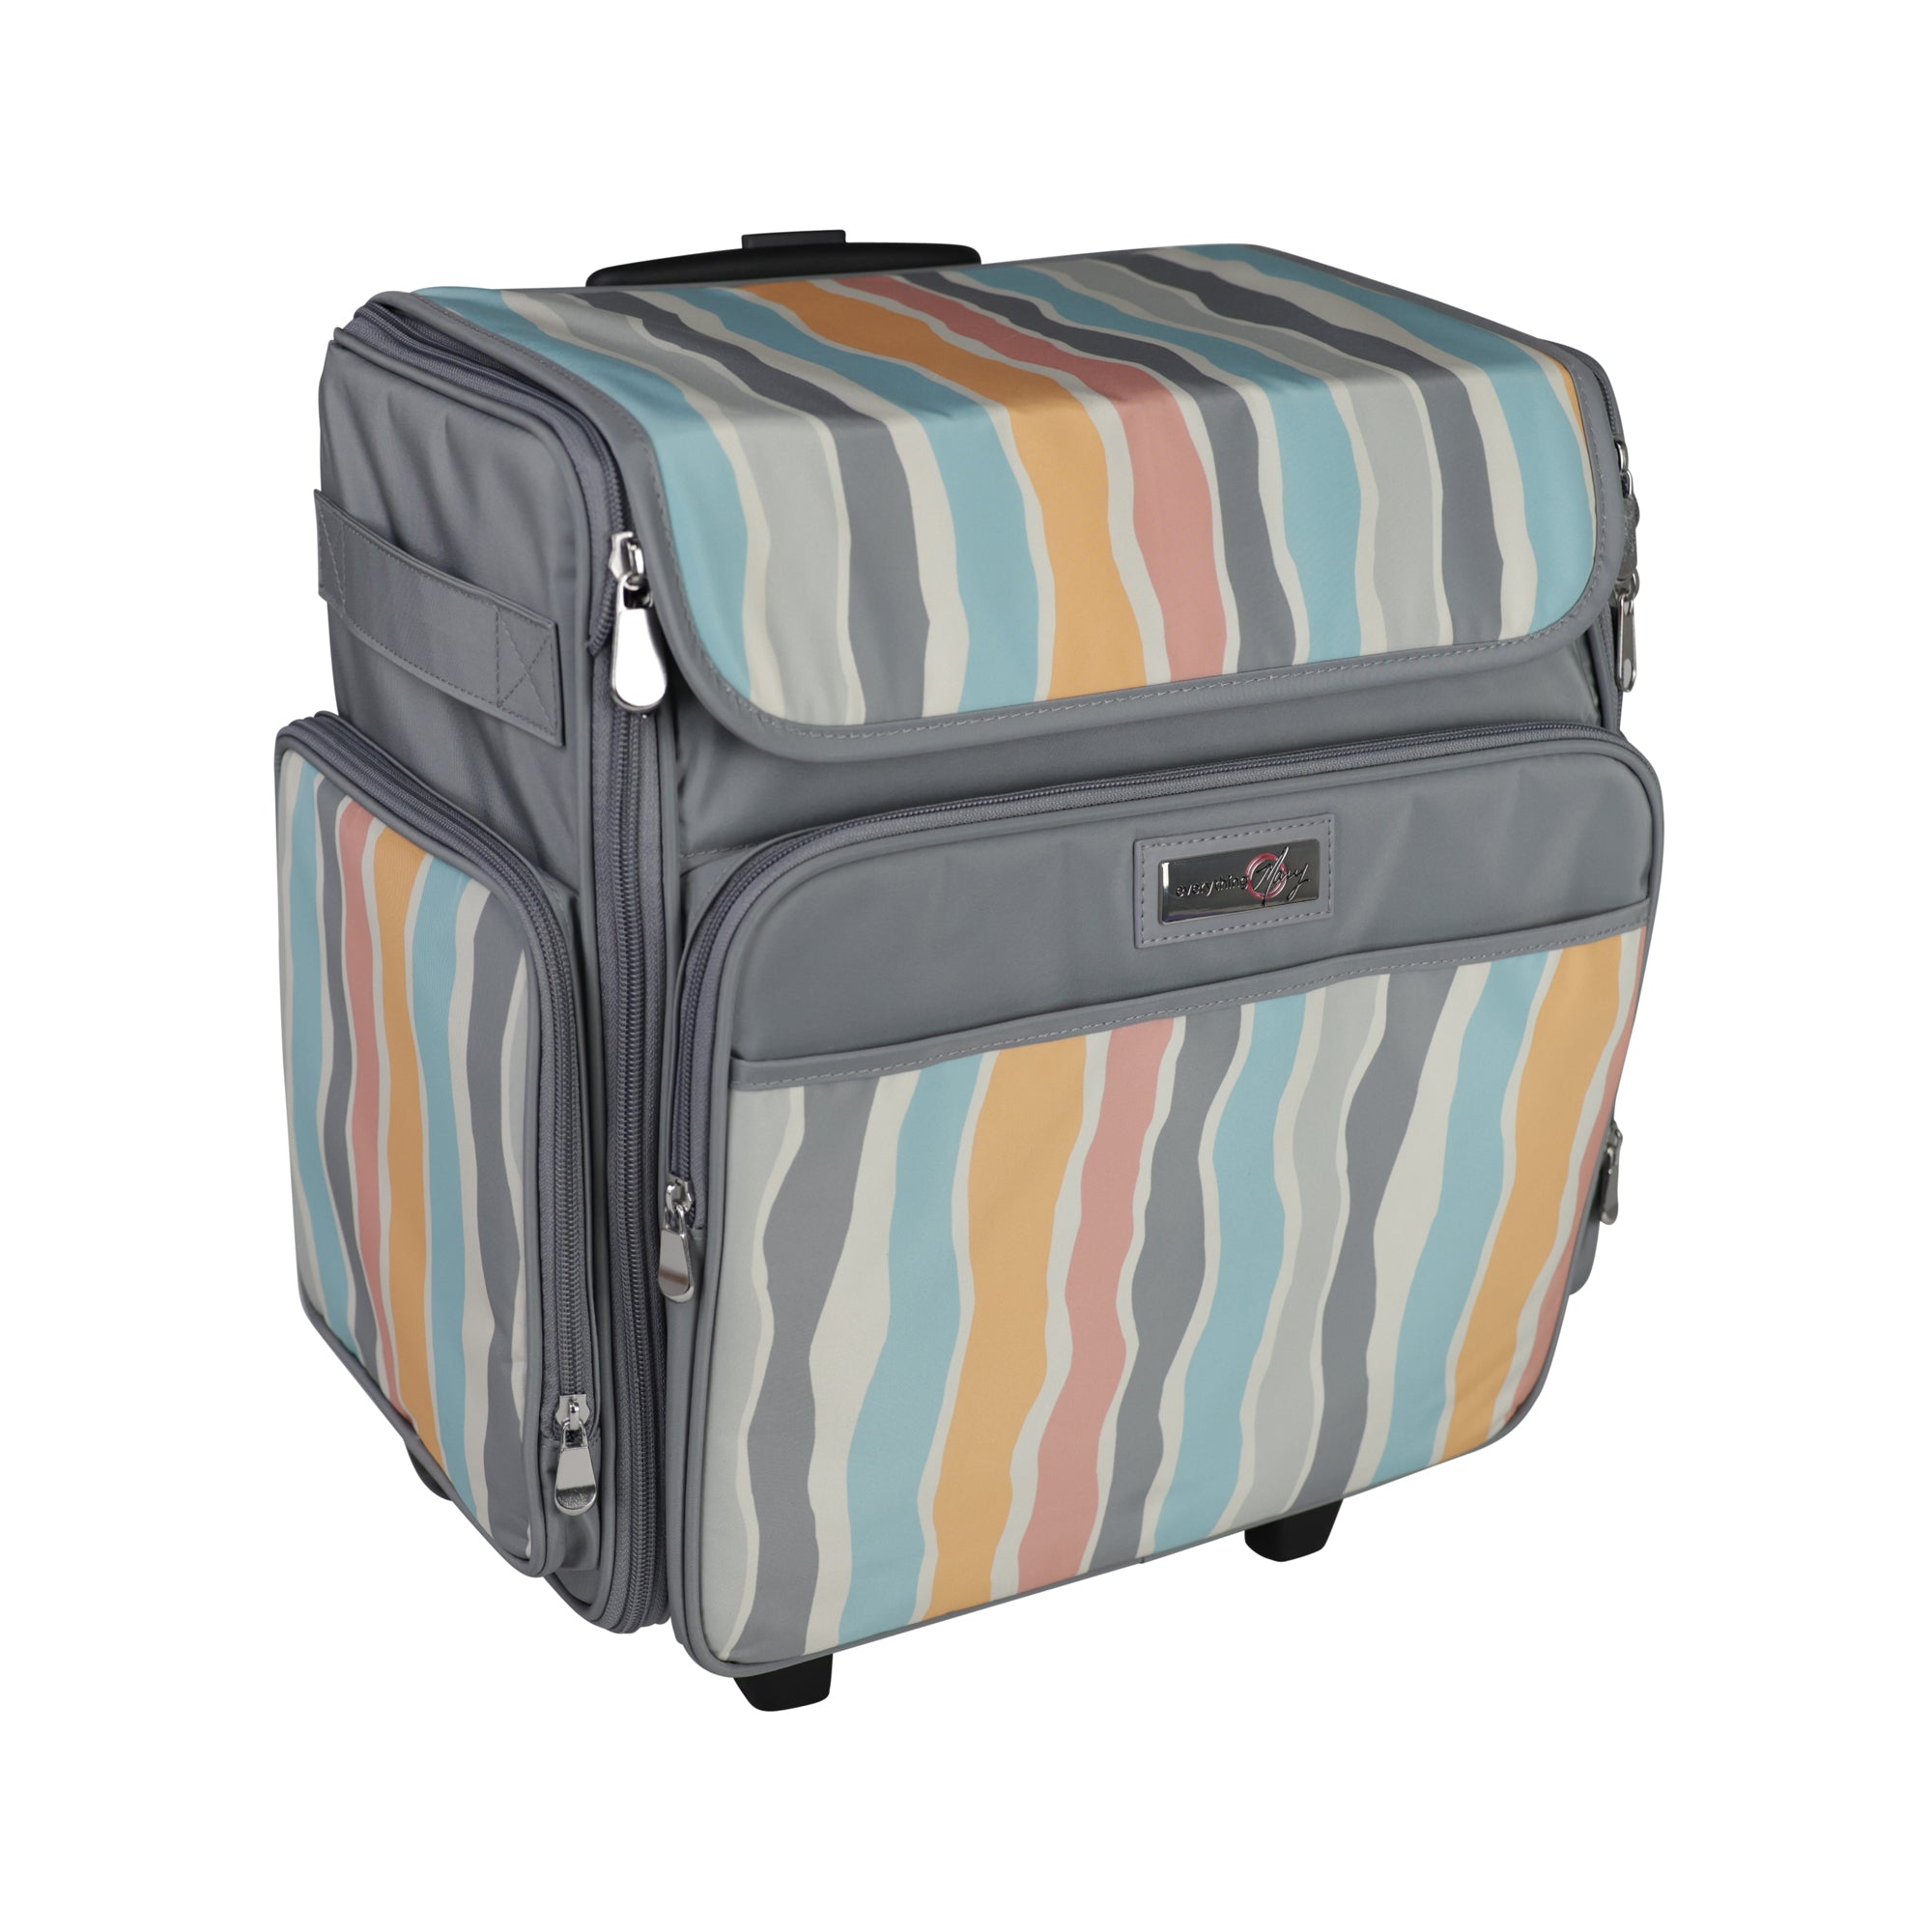 Deluxe Collapsible Rolling Scrapbook Case, Heather - Everything Mary